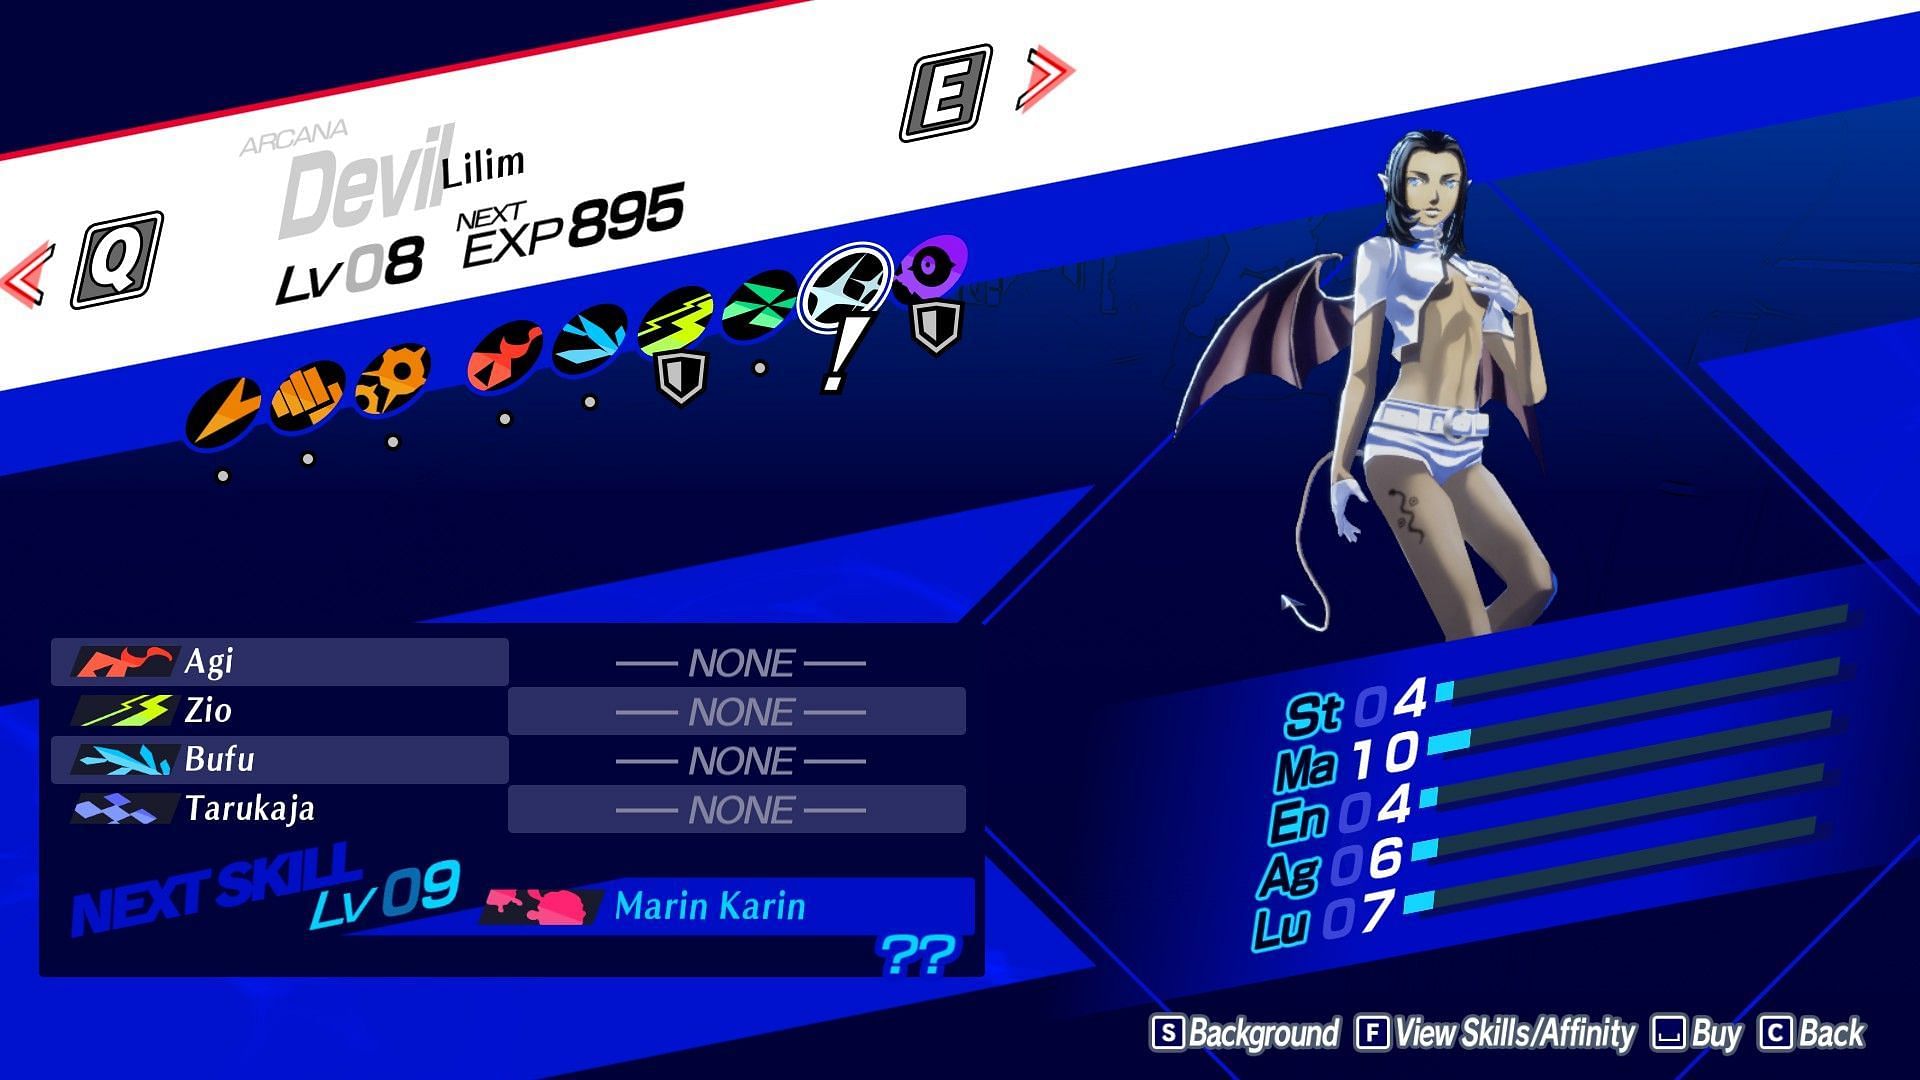 Lilim provides you with various offensive abilities (Image via Atlus)